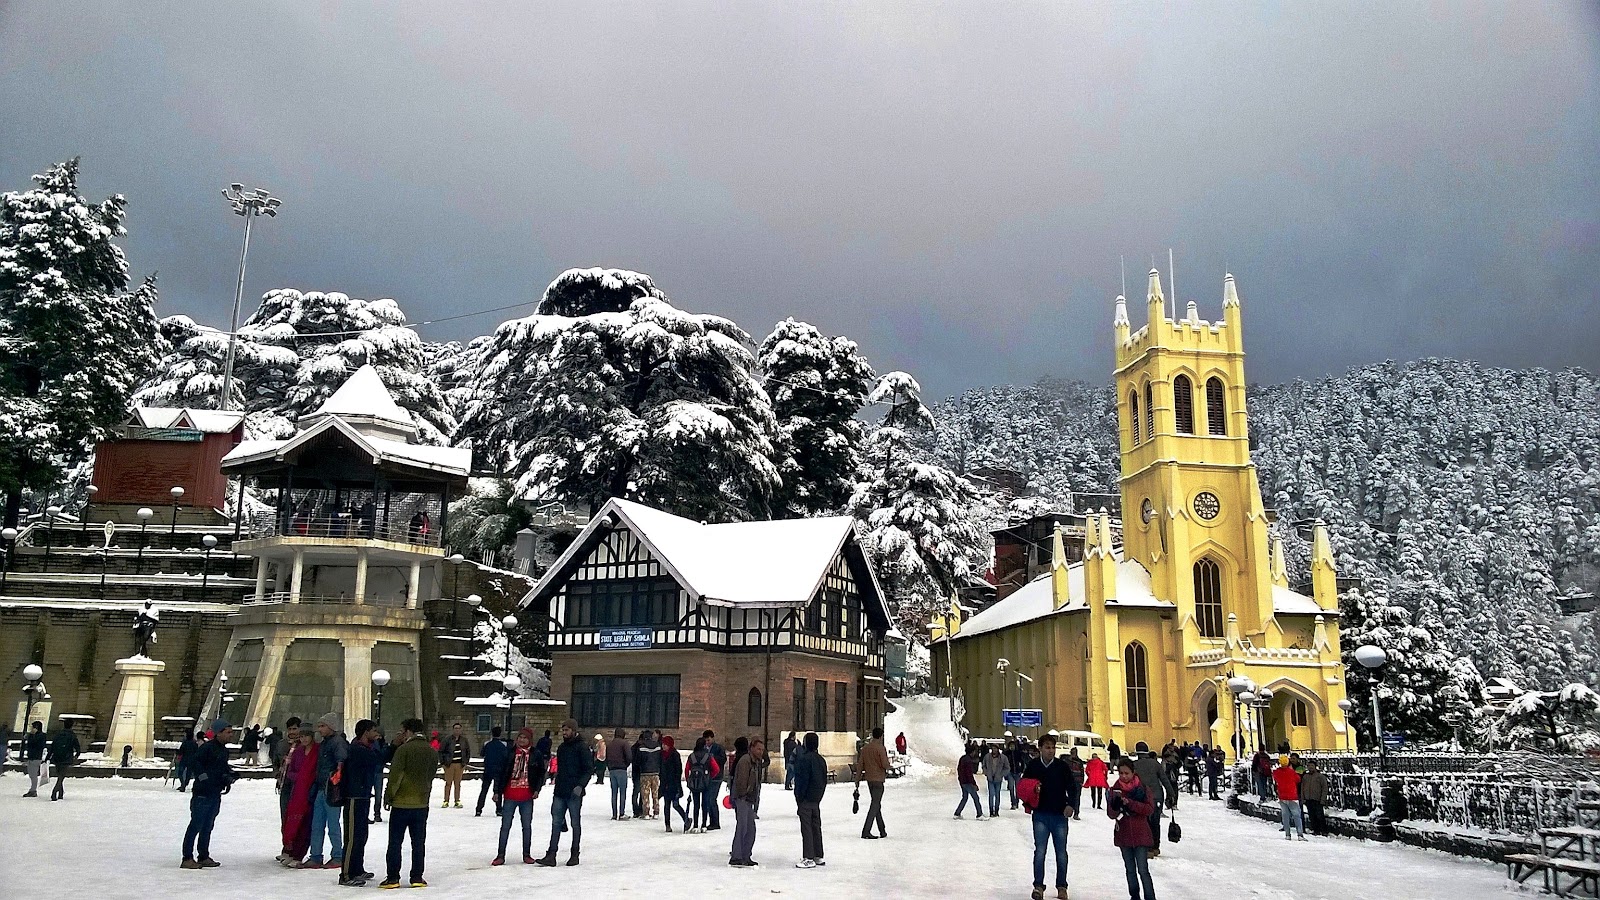  Shimla is Known as one of the best Tourist place in Himachal Pradesh